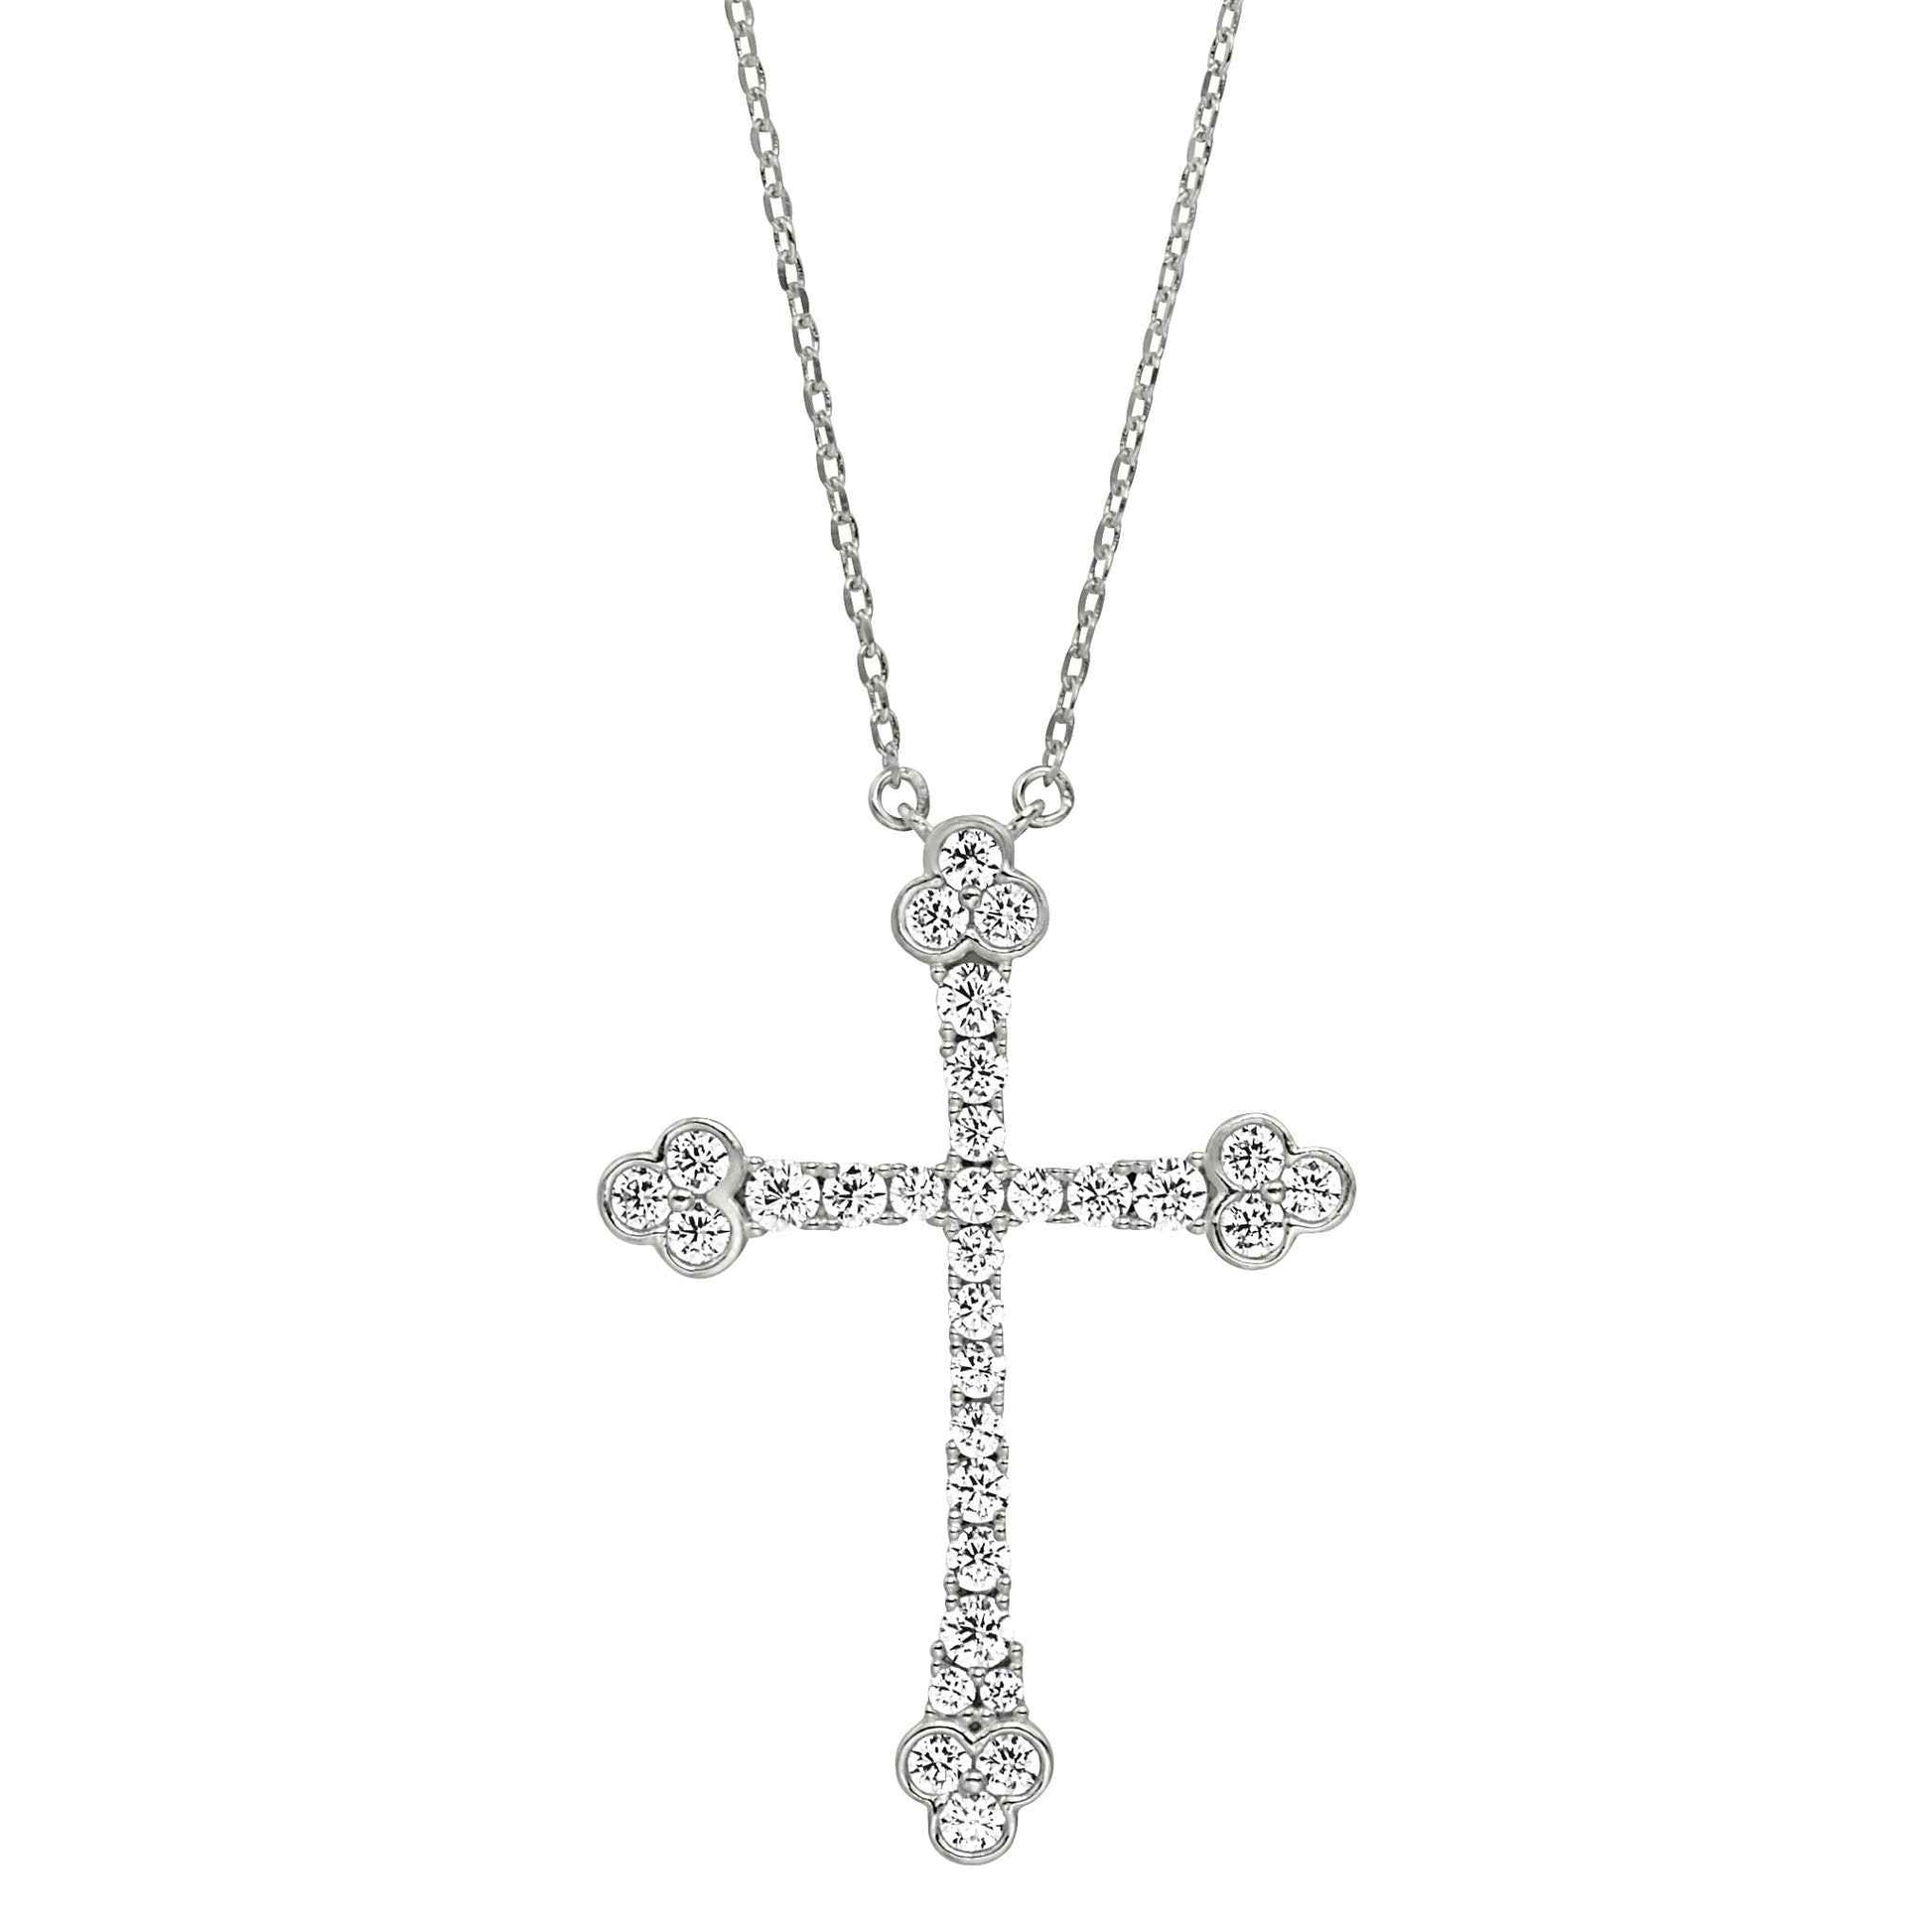 A cross necklace with triple simulated diamond accents displayed on a neutral white background.